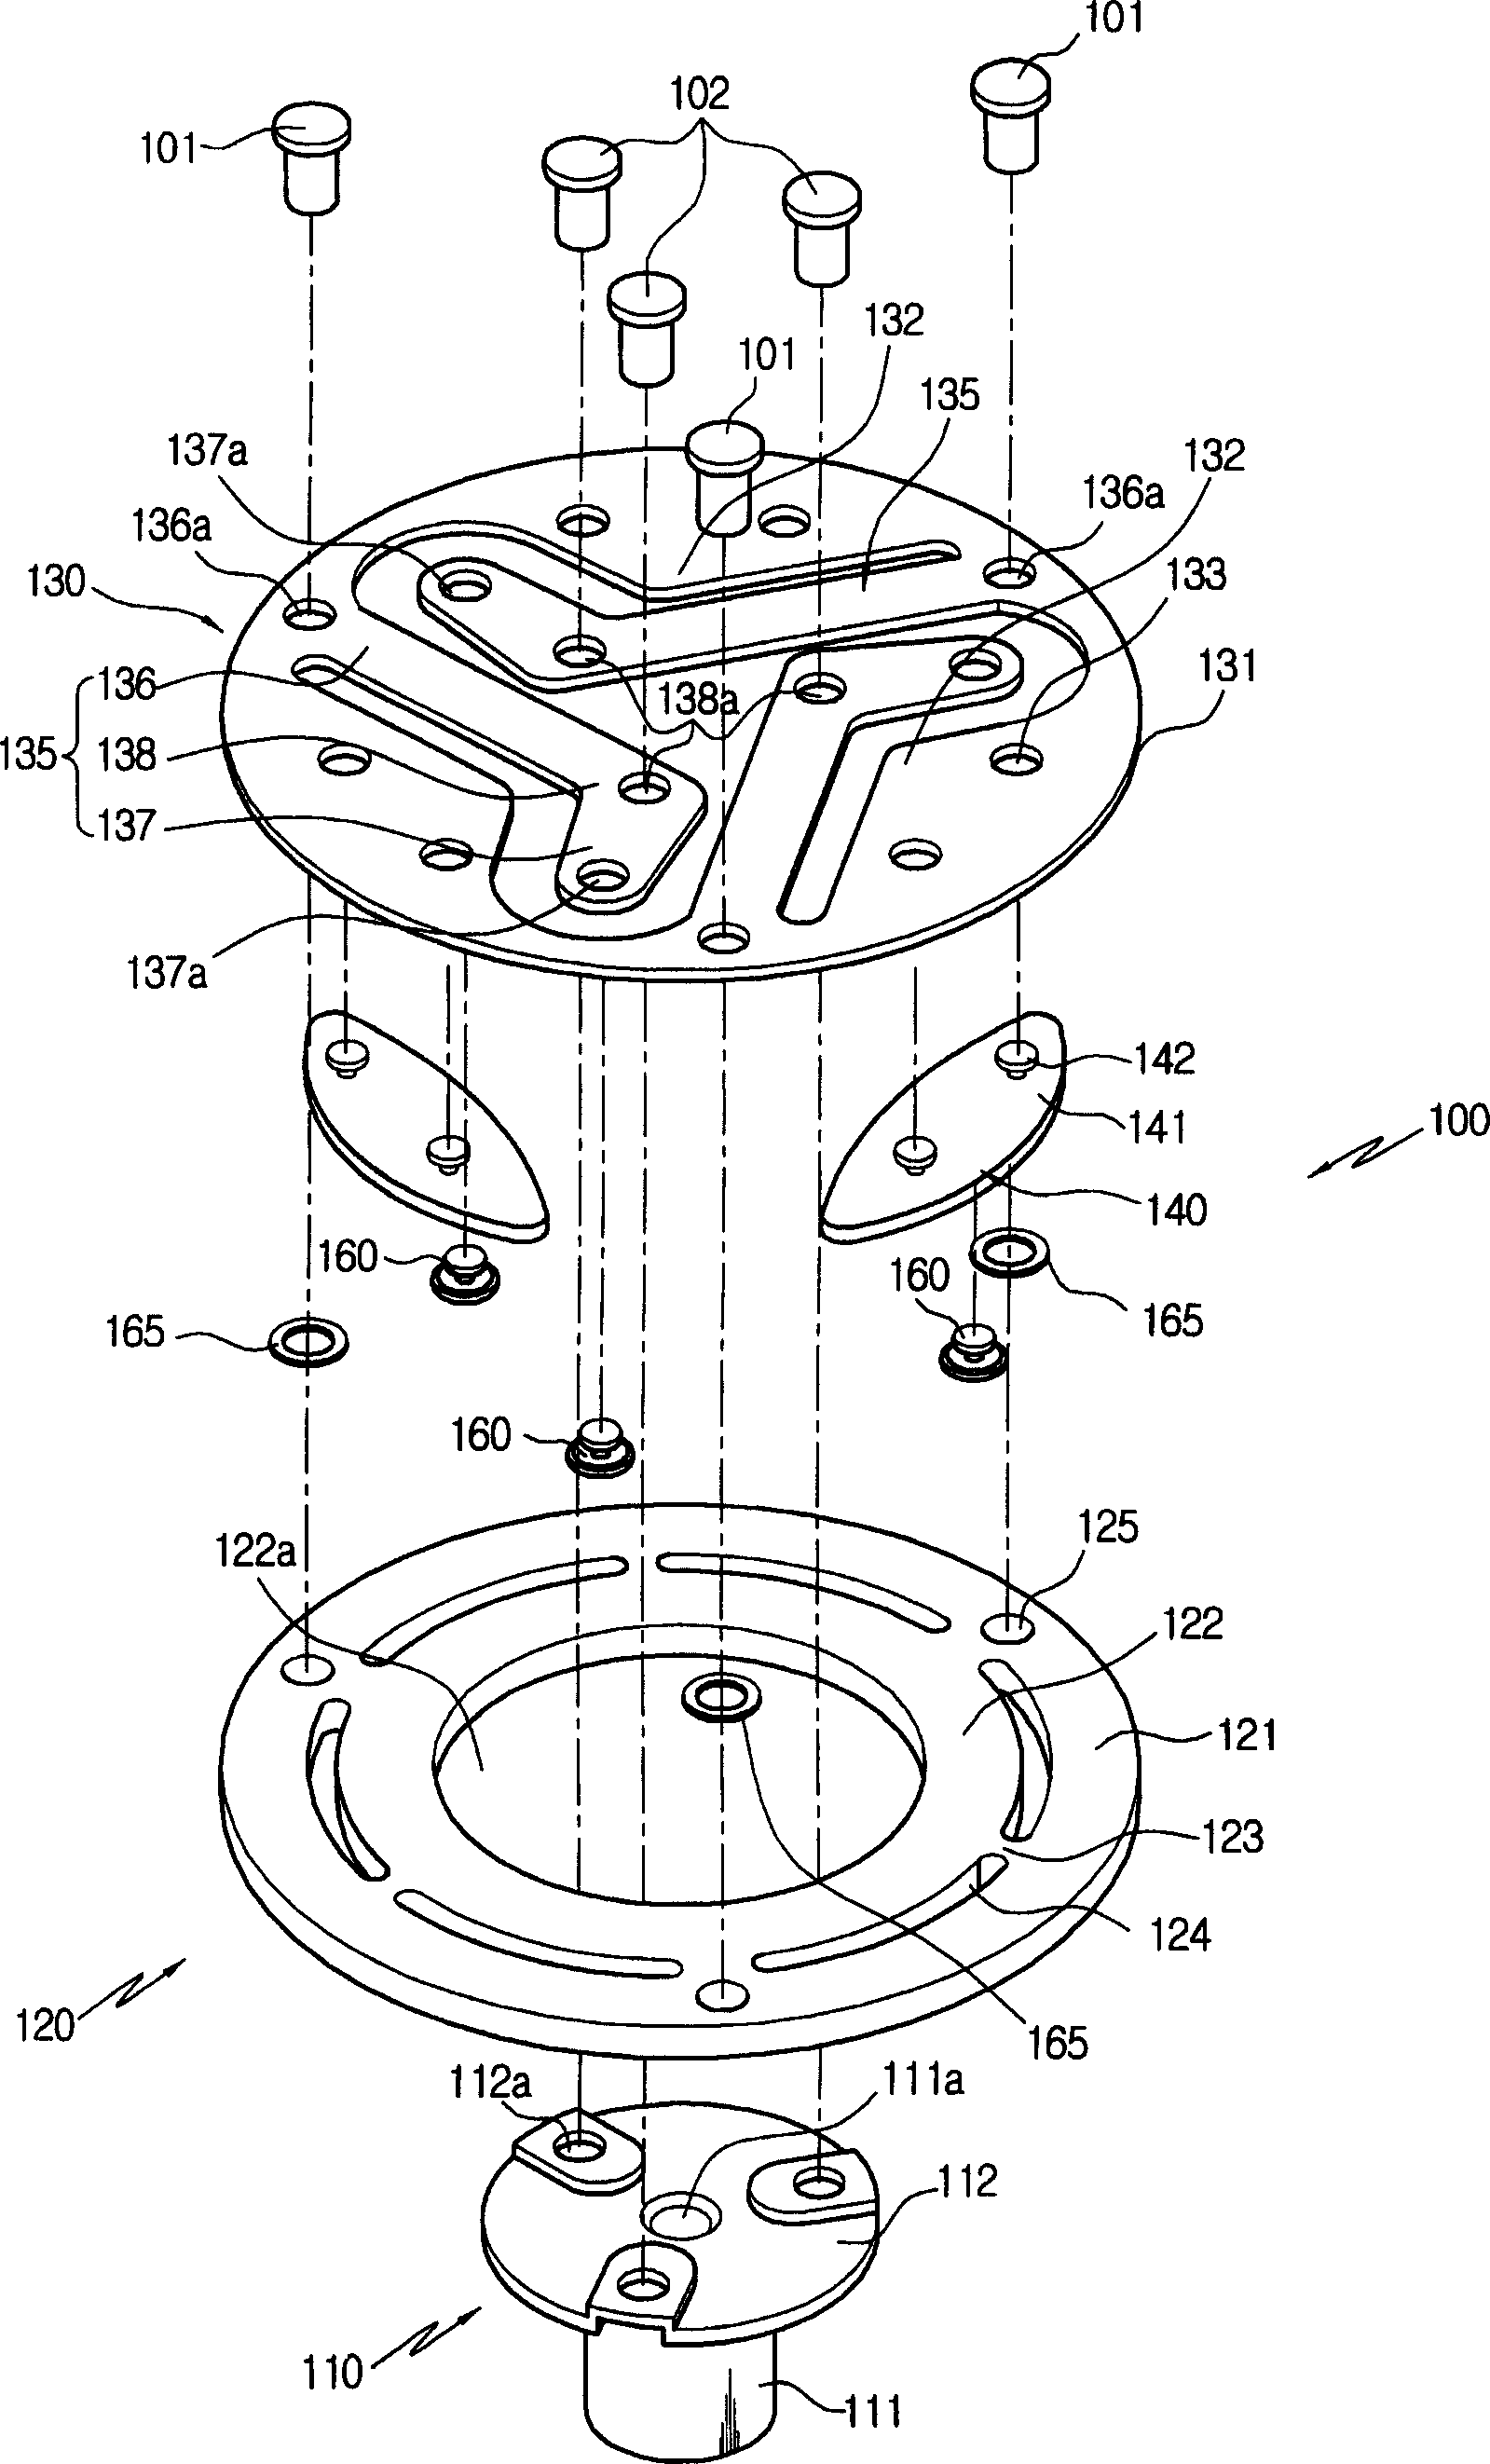 Disc and hub assembly for electromagnetic clutch in a compressor